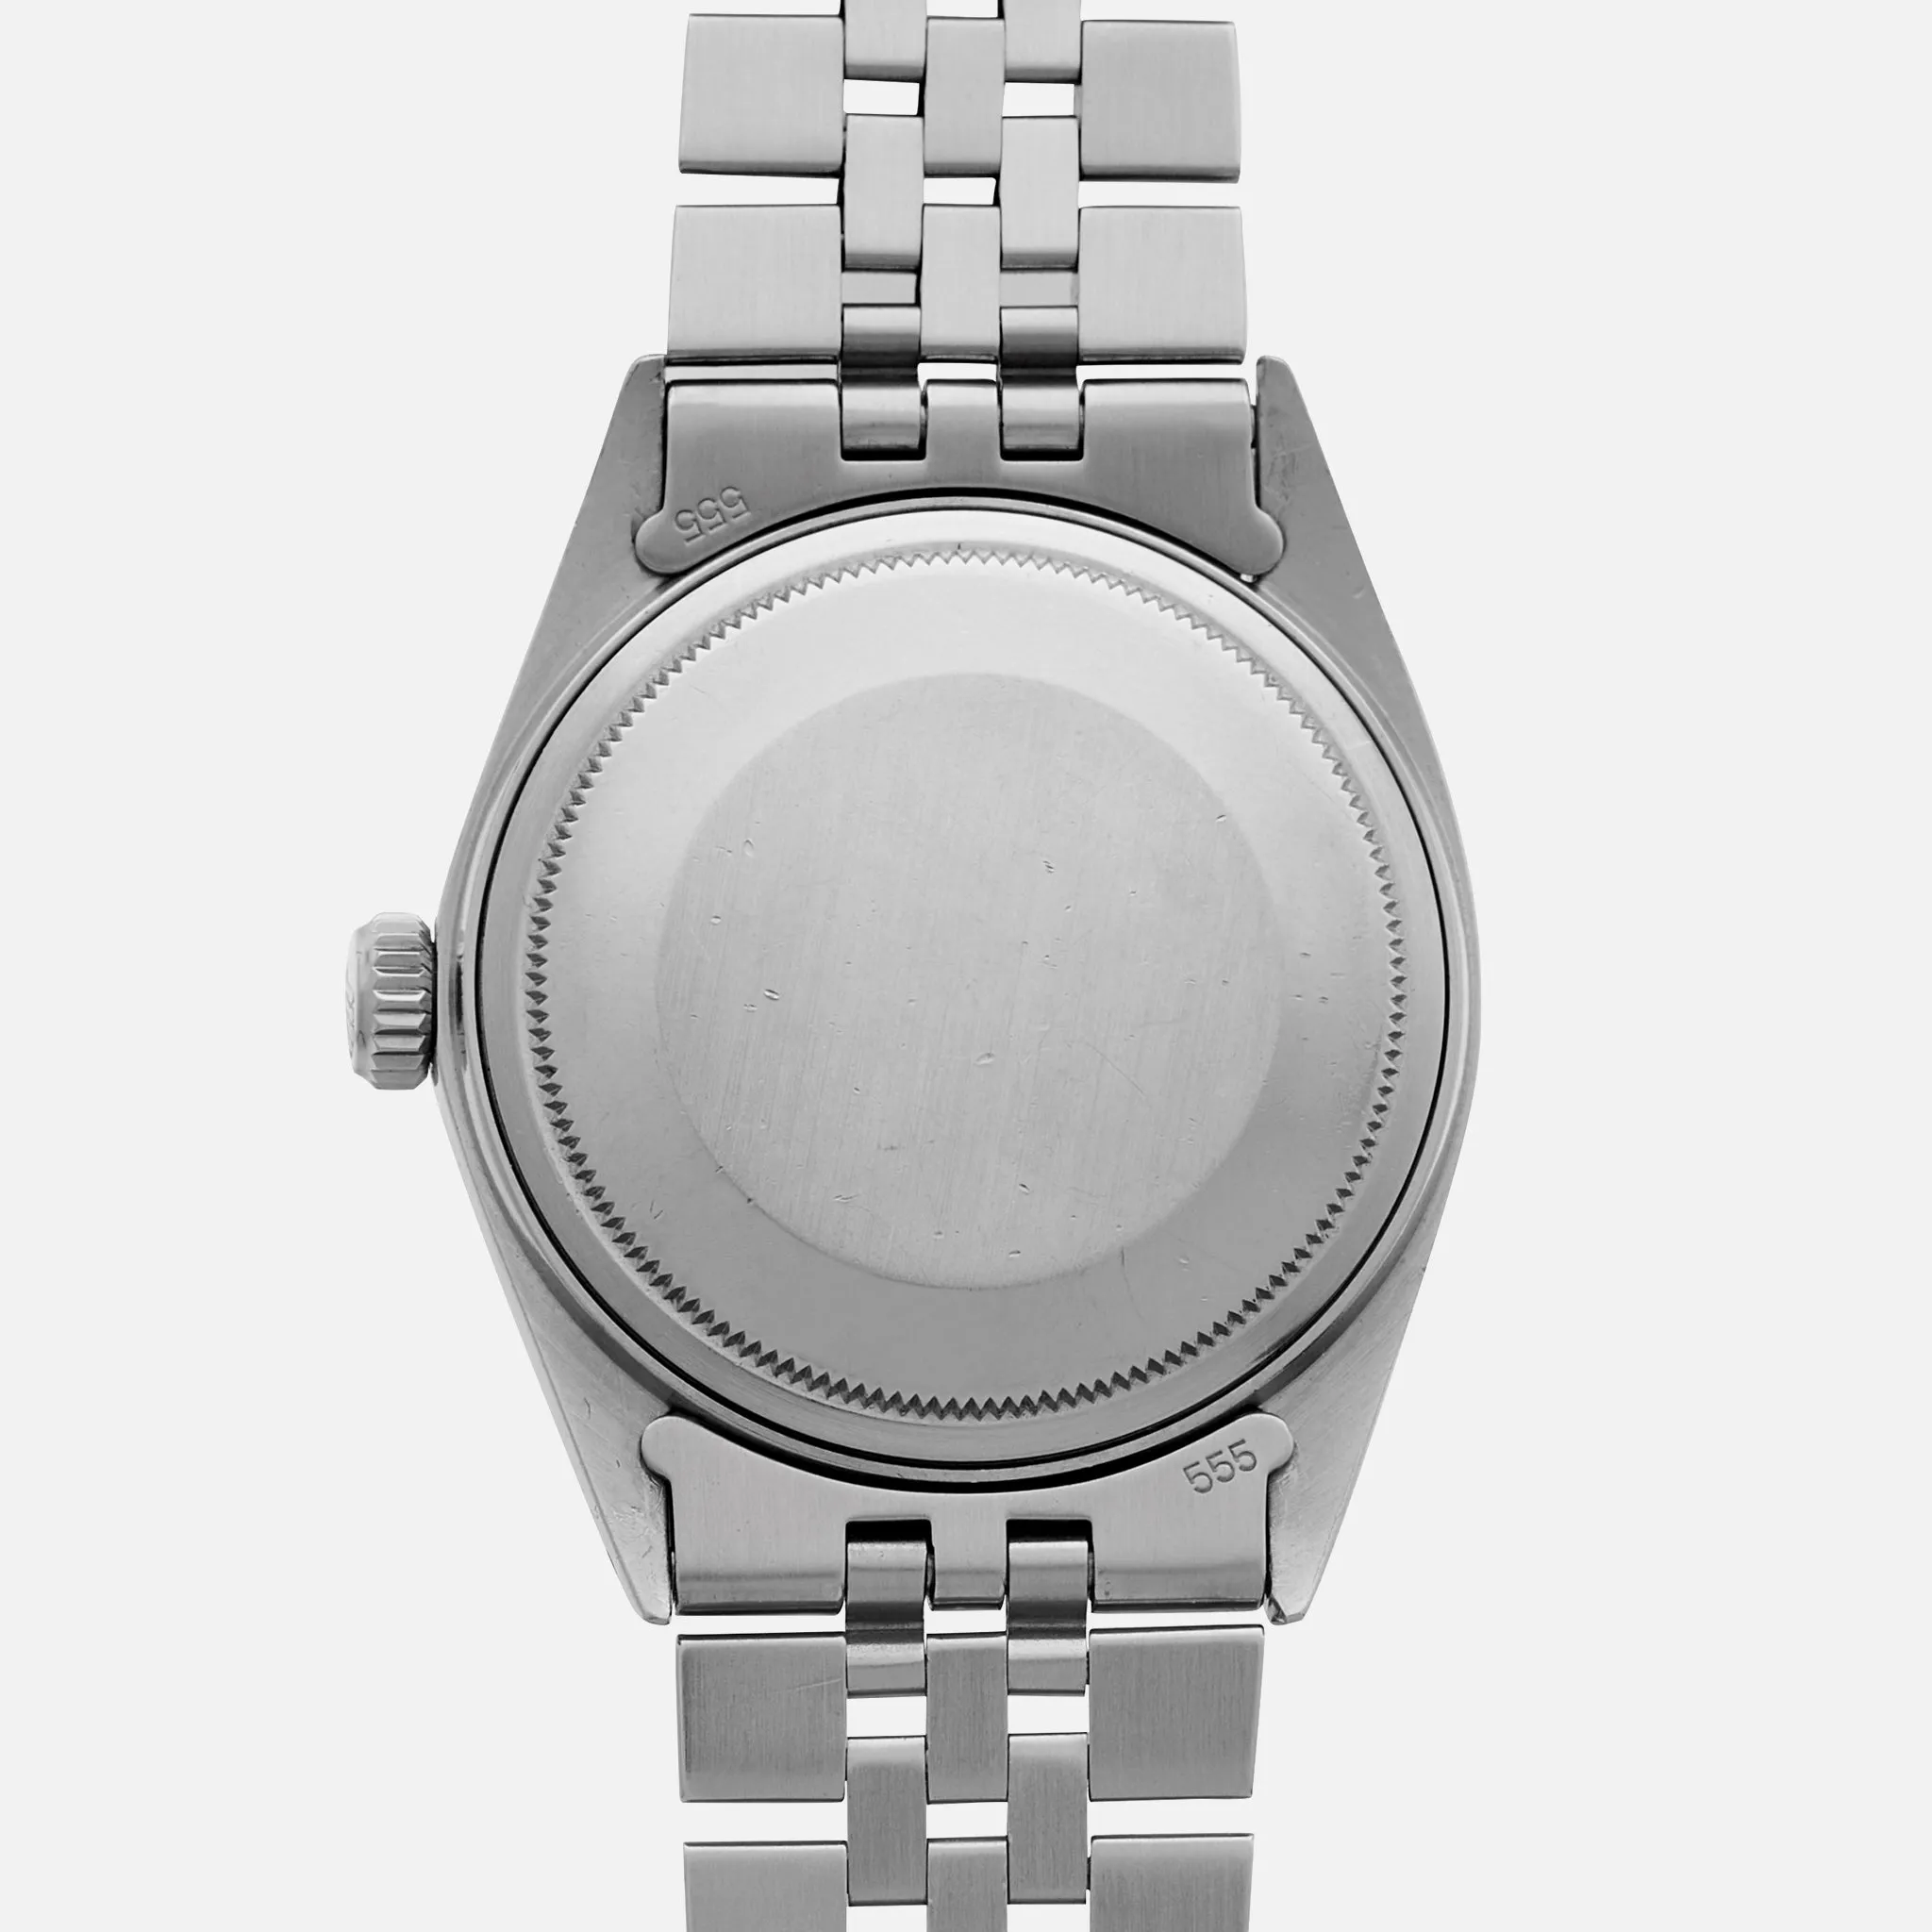 Rolex Datejust 1603 36mm Stainless steel Gray 3